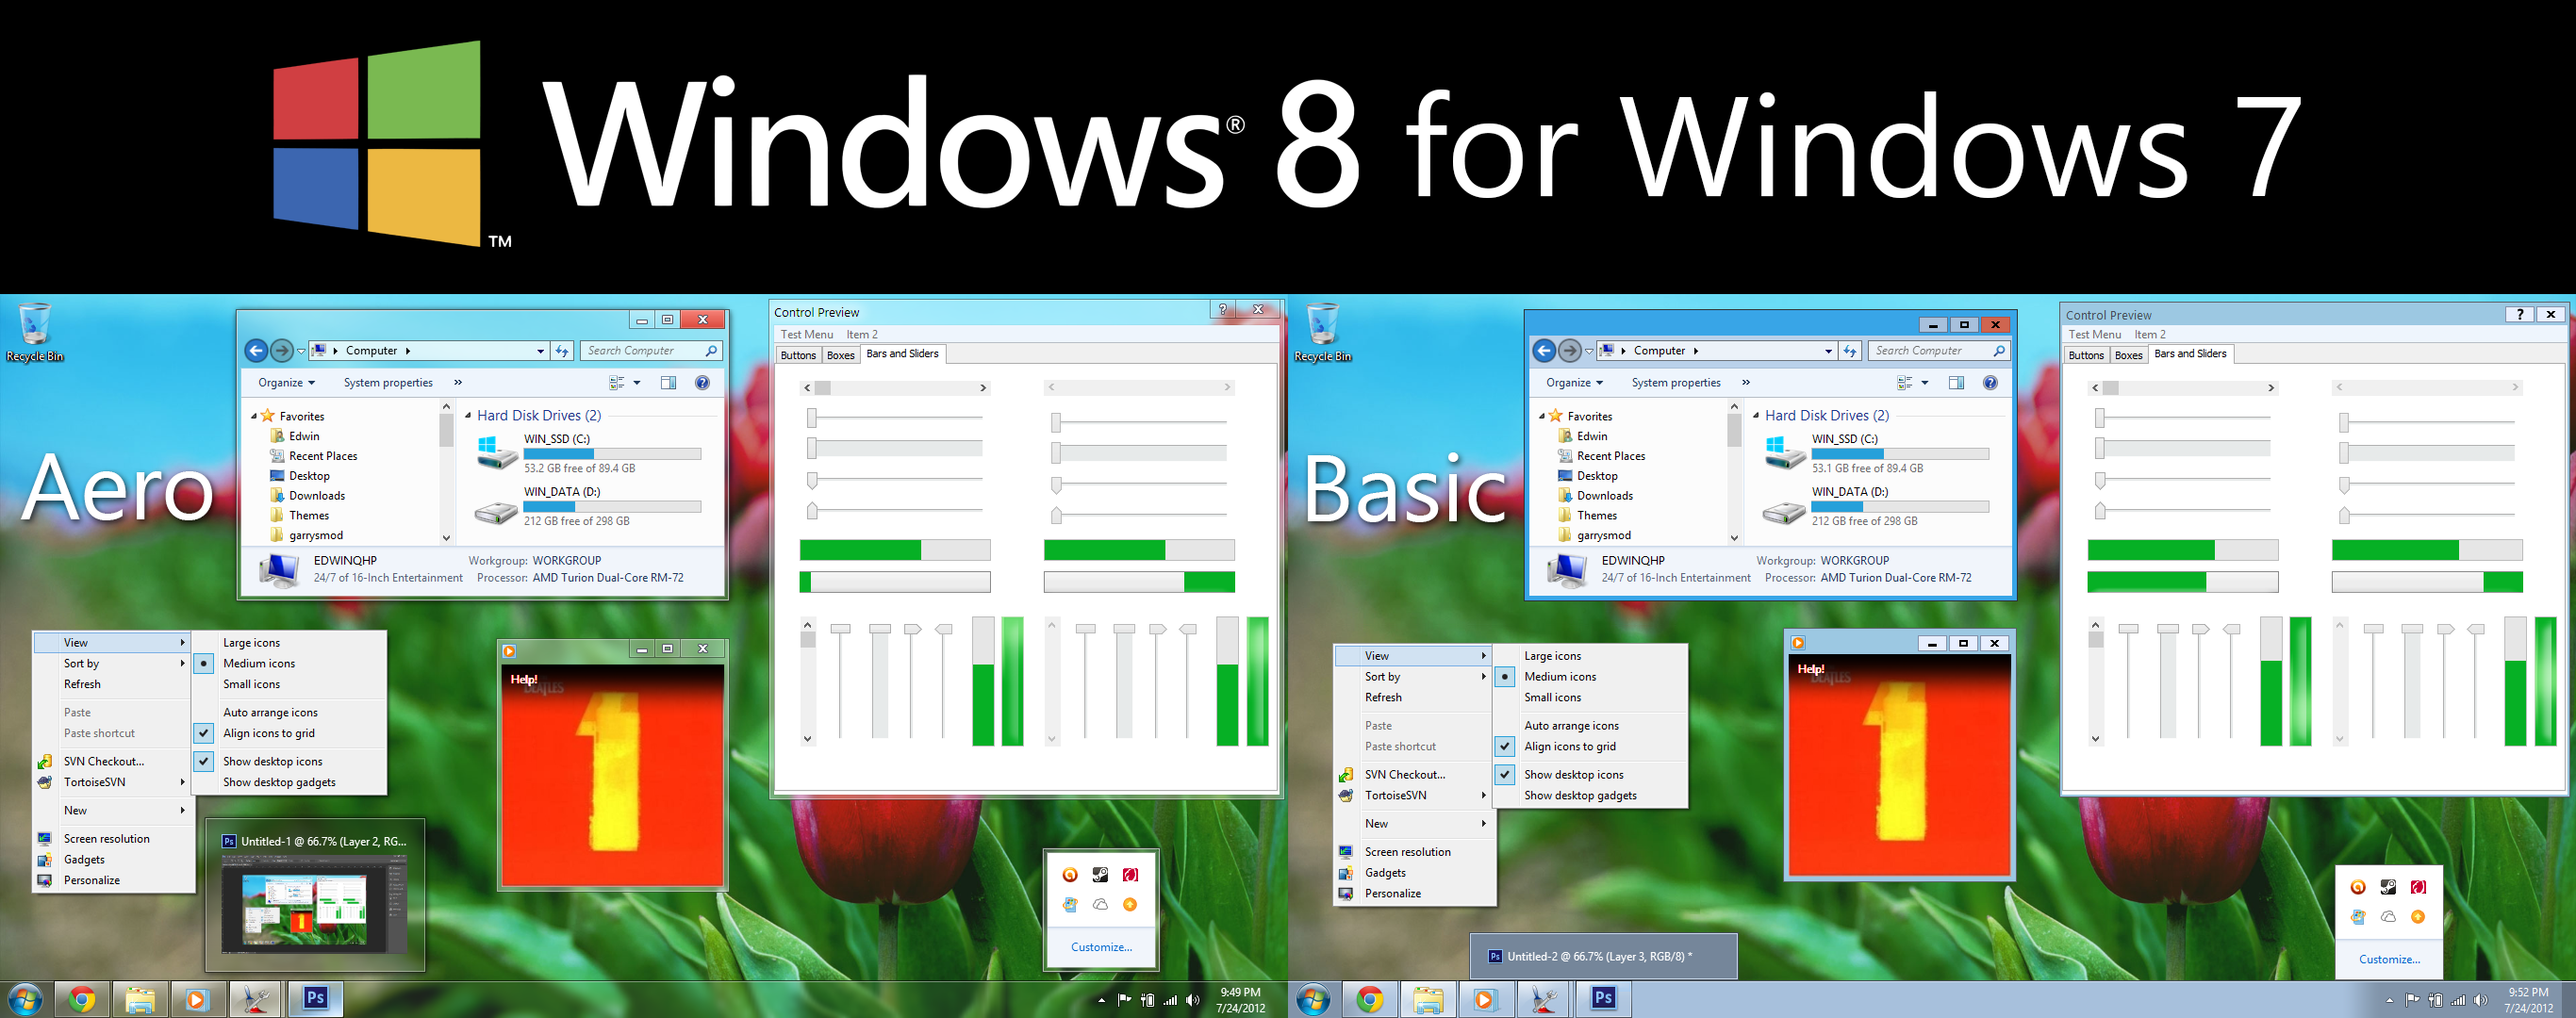 Windows 8 Release Preview for Windows 7 by wango911 2732x1080